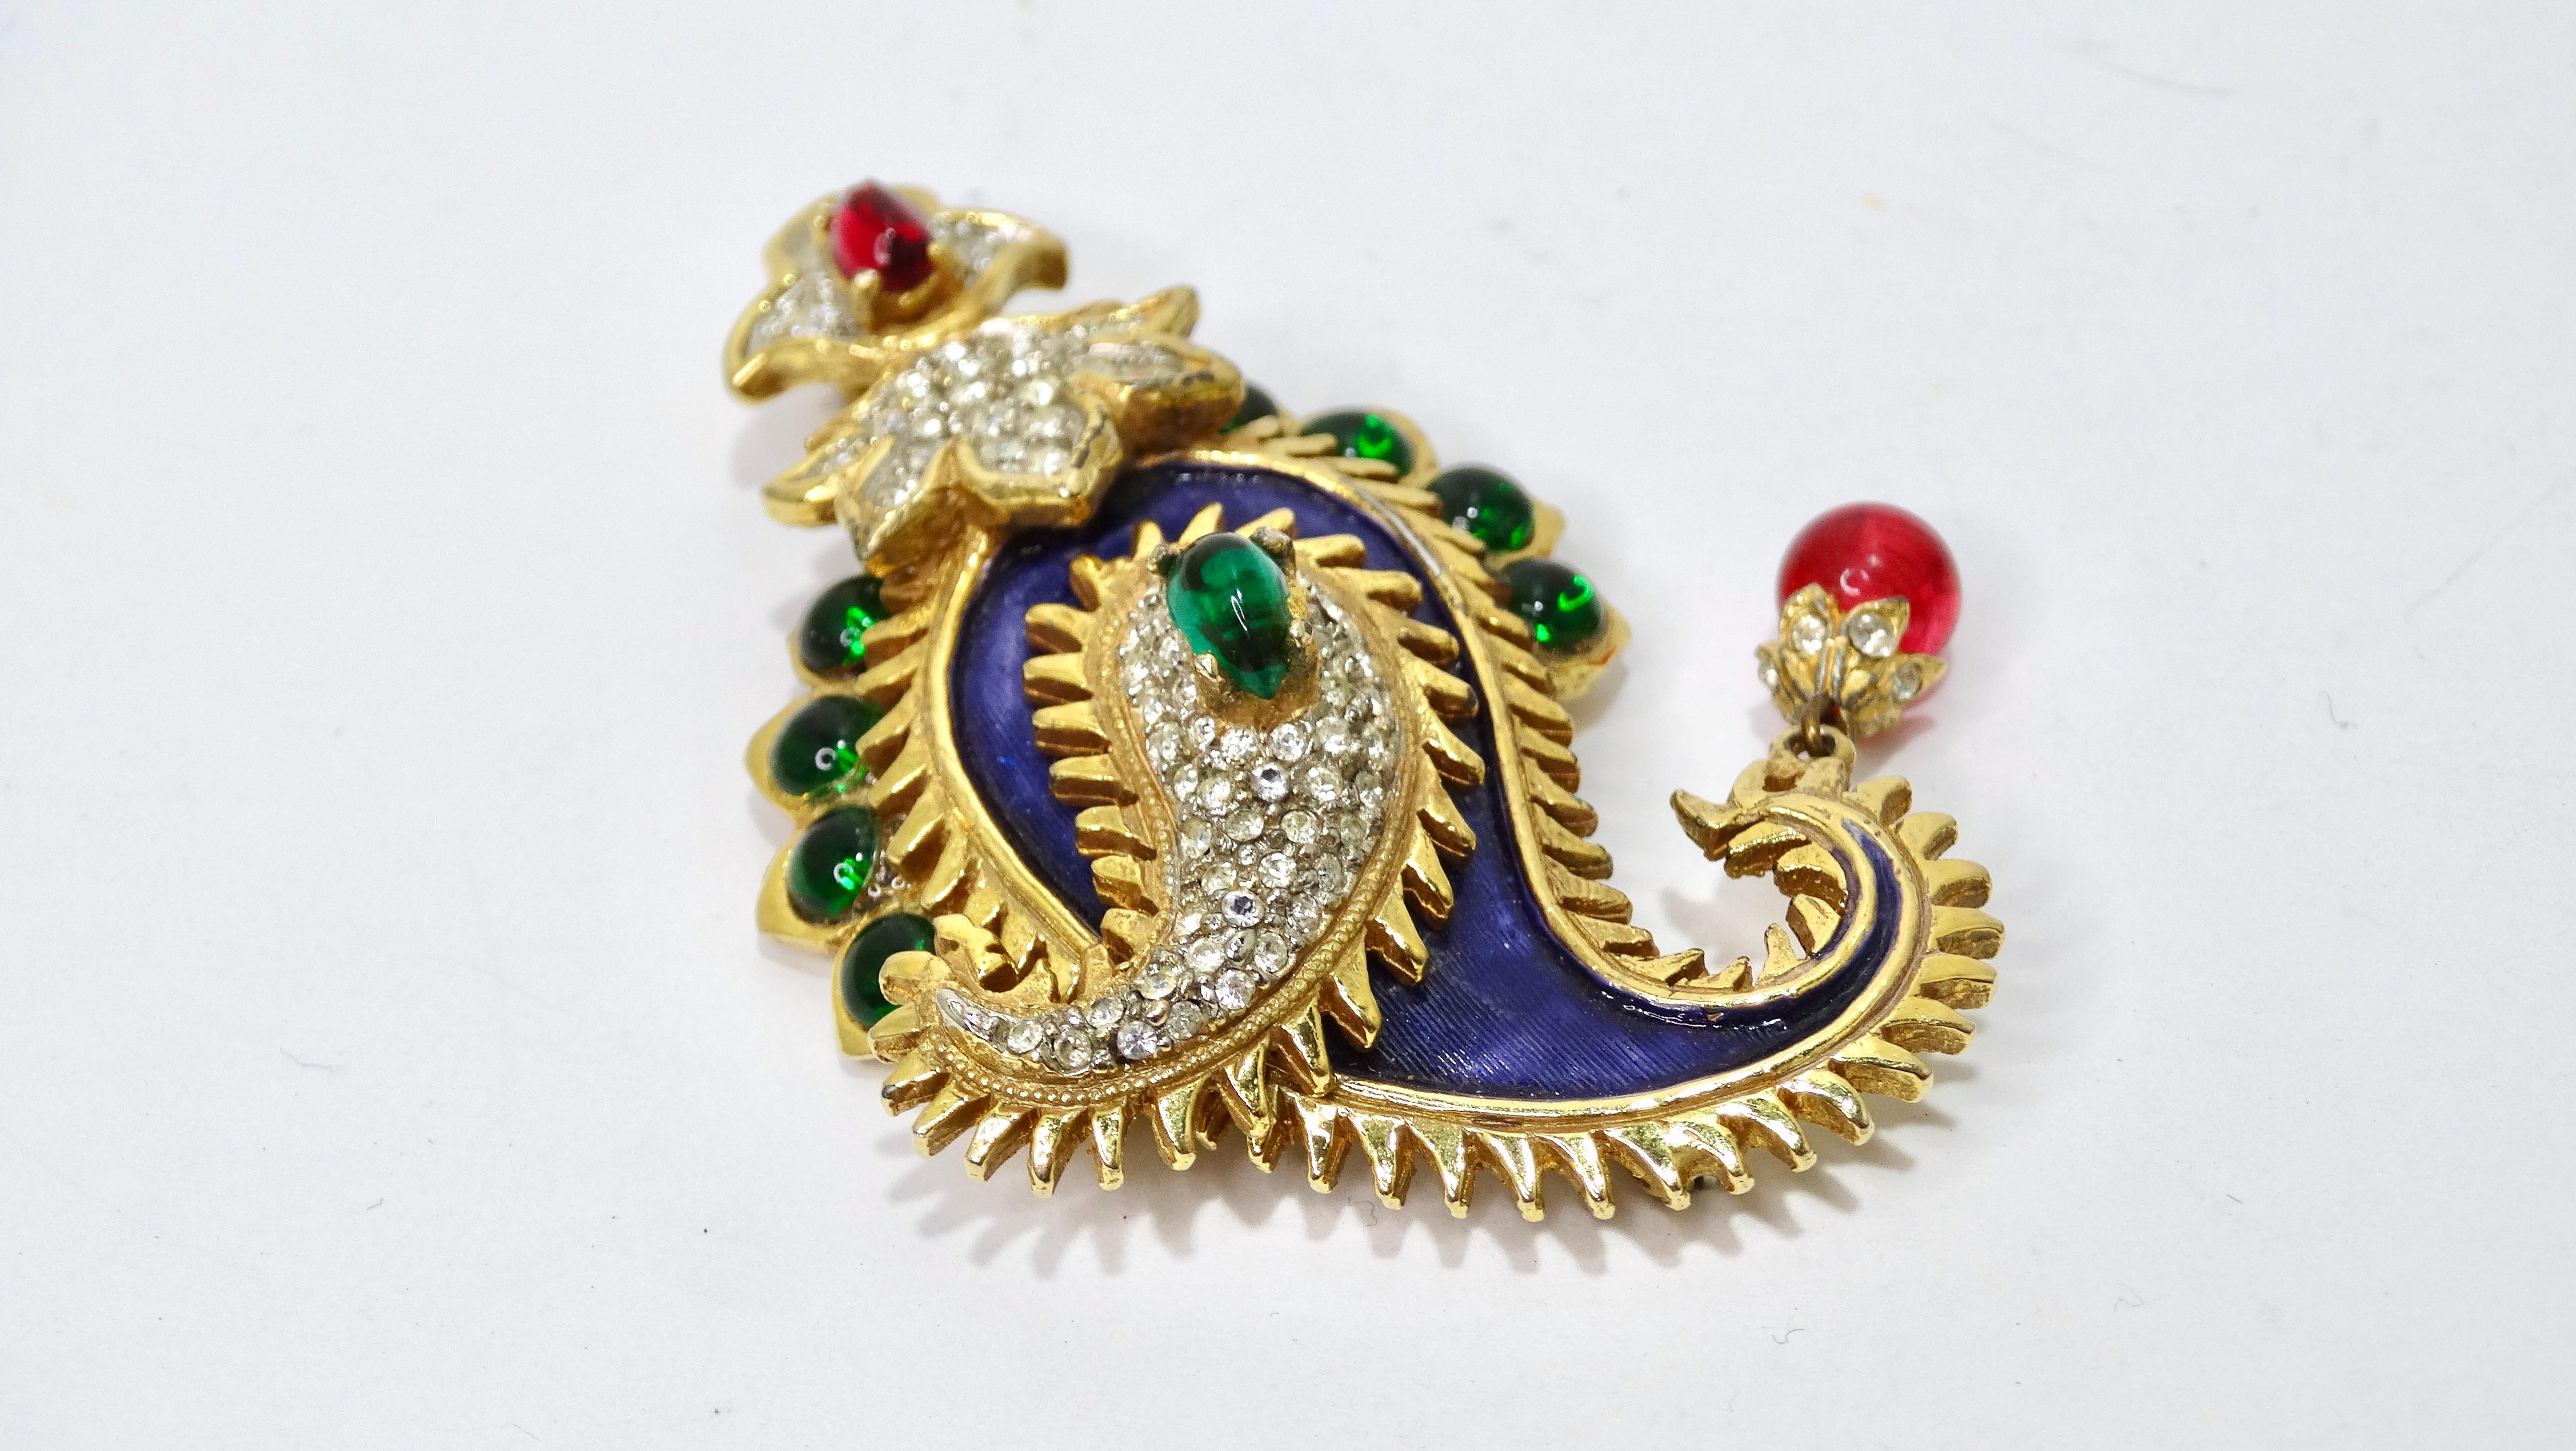 This is a spectacular find from none other than Kenneth Jay Lane! This paisley Maharani Kenneth Jay lane brooch features, and green ruby glass beads, pave rhinestones and purple enamel embellishing. Attached to it is a red bead shaped dangling